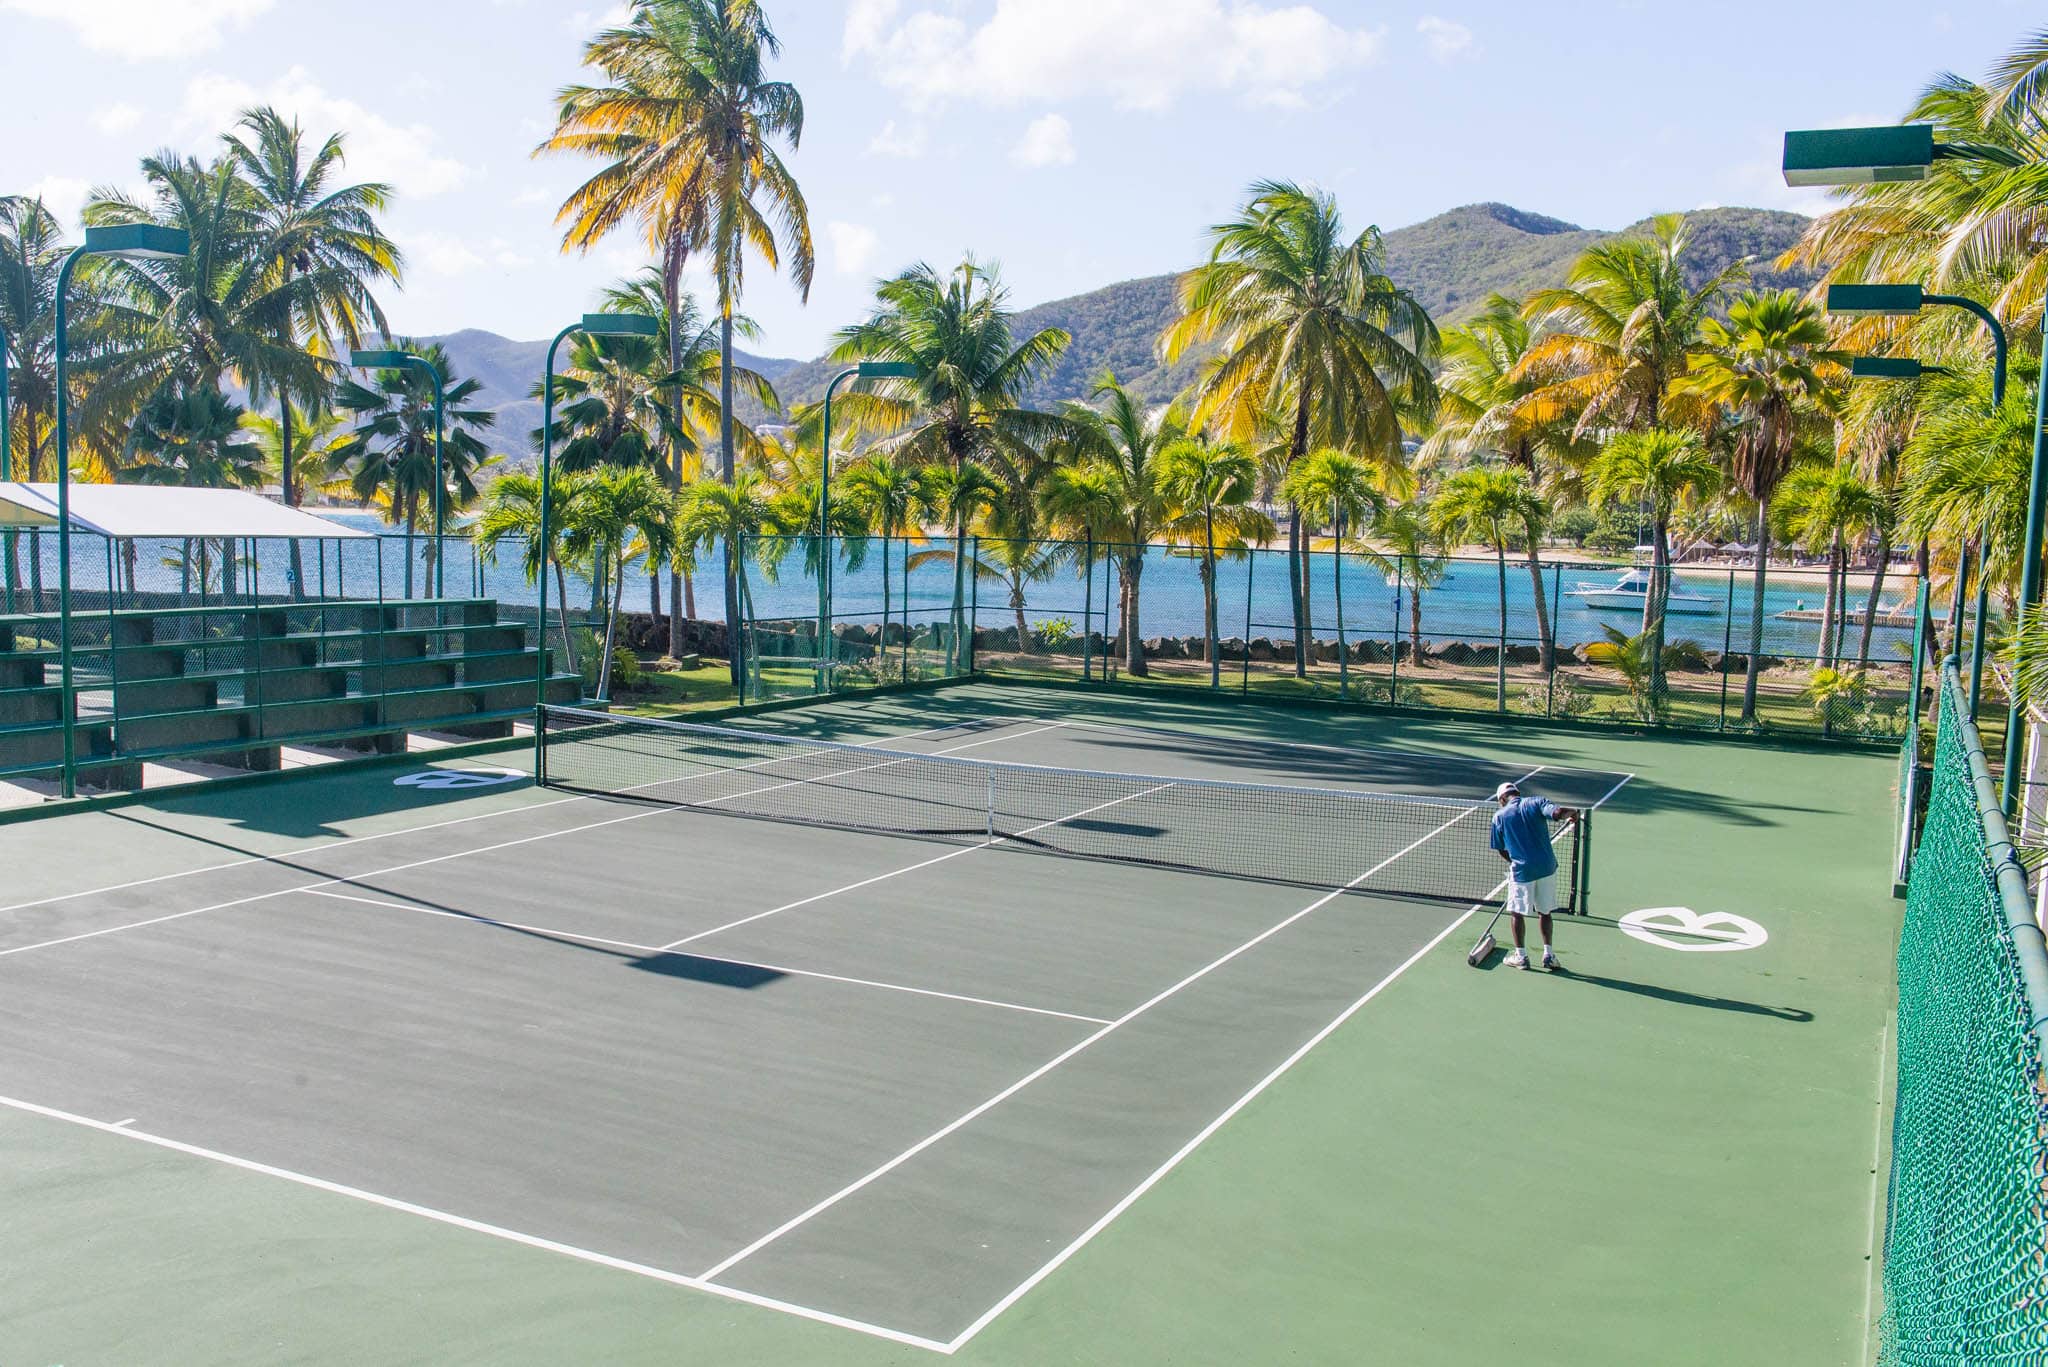 There is probably no better place to play tennis in the Caribbean than here.